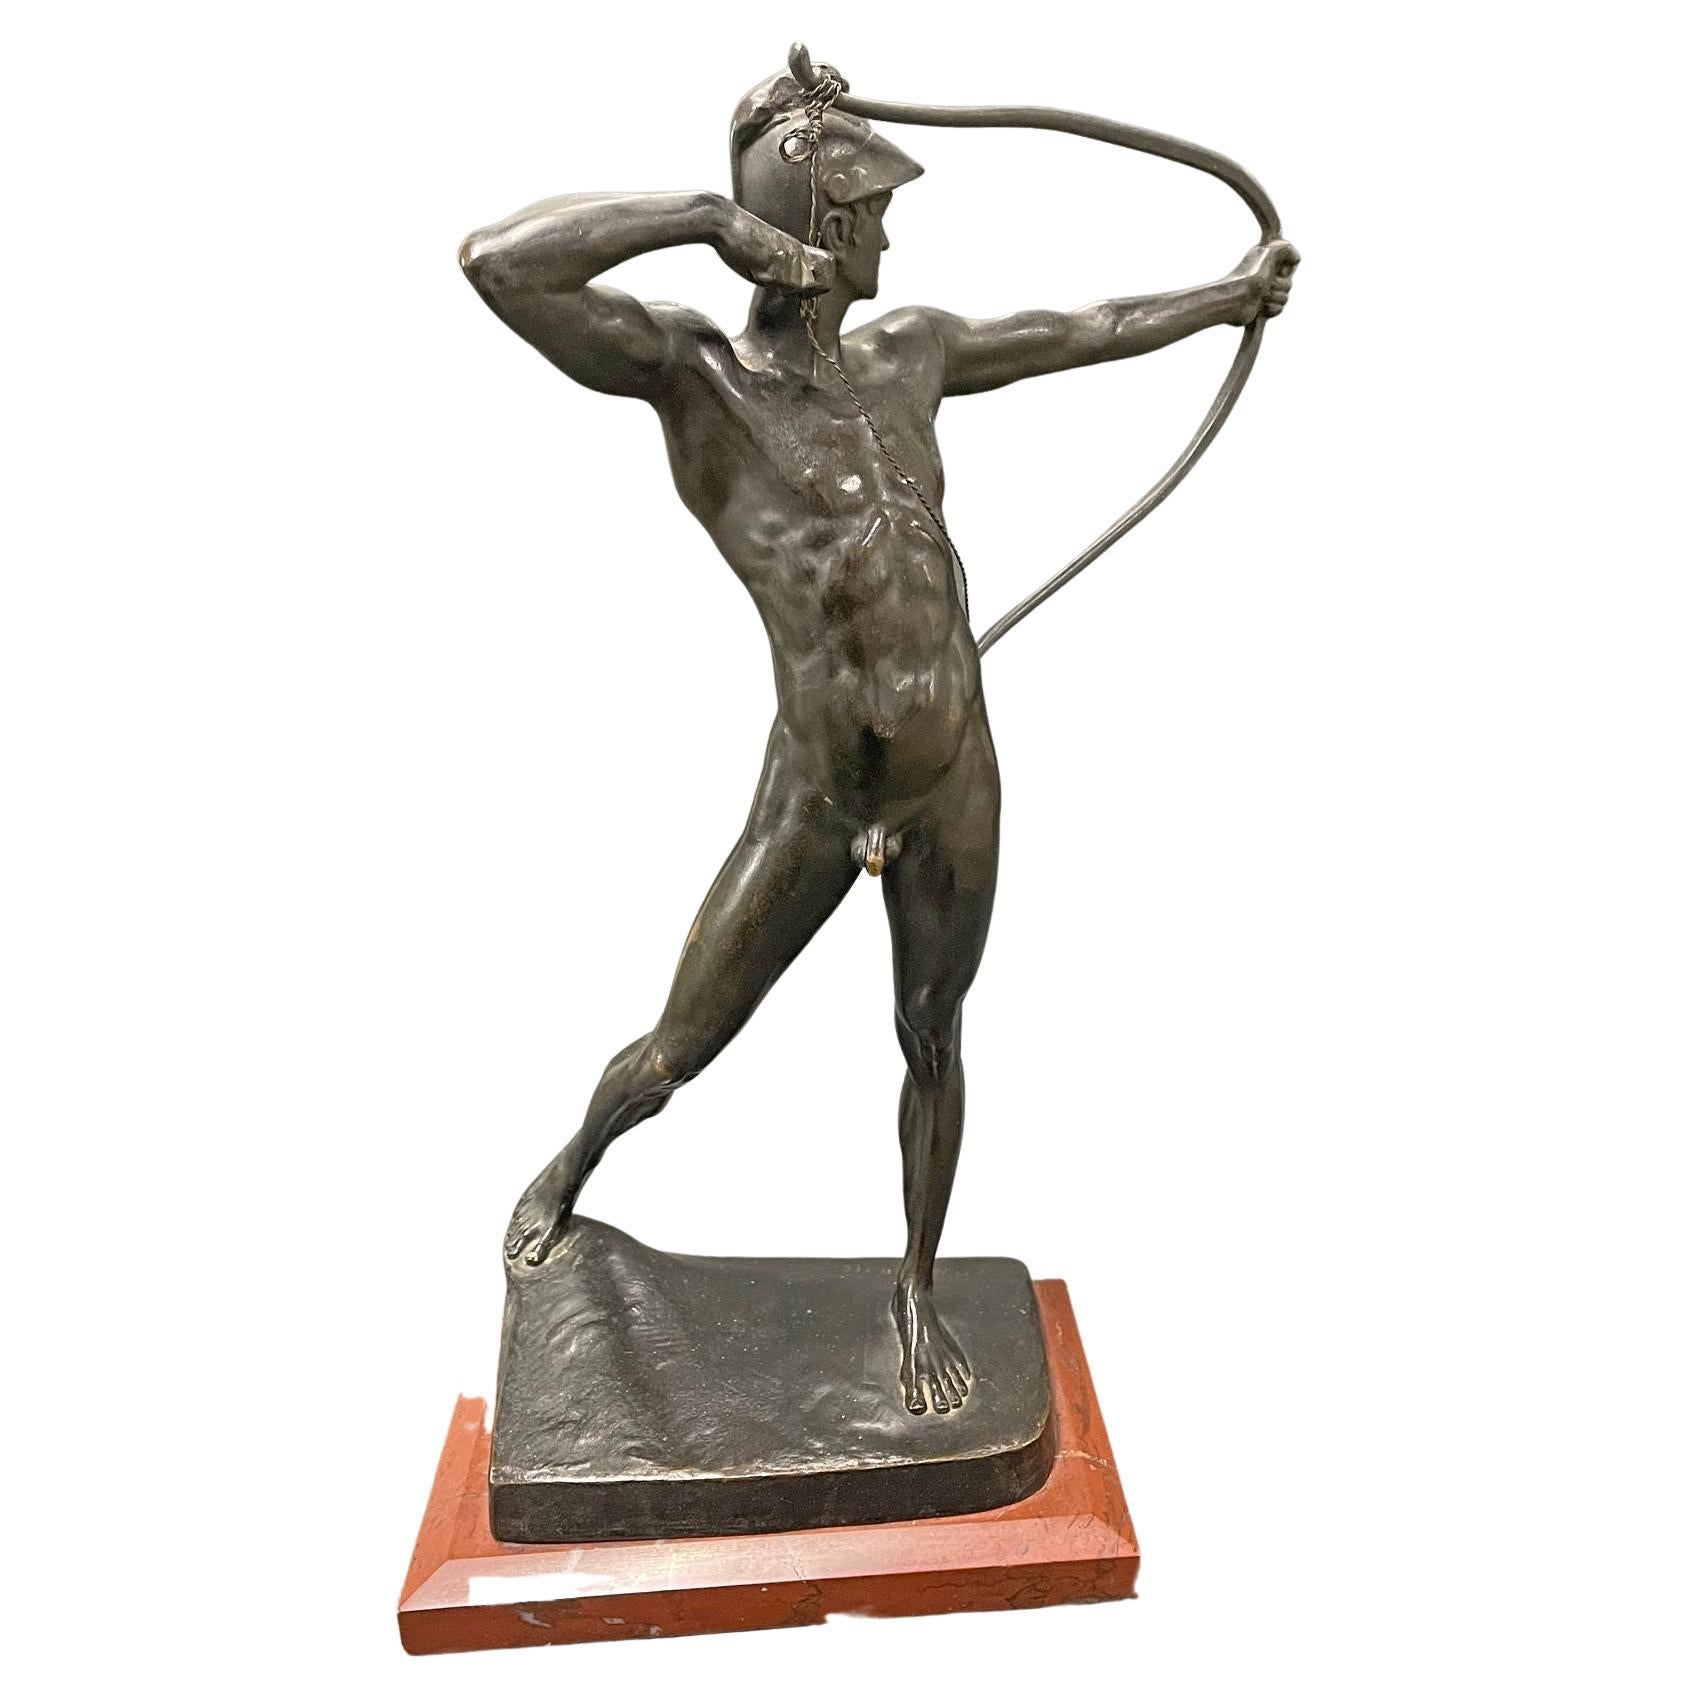 Brilliantly sculpted and cast with very fine detail with a rich, lustrous patina, this celebrated bronze of a fully nude male archer was sculpted by Ernst Moritz Geyger in the 1890s and cast around 1900. His original, large bronze was exhibited at